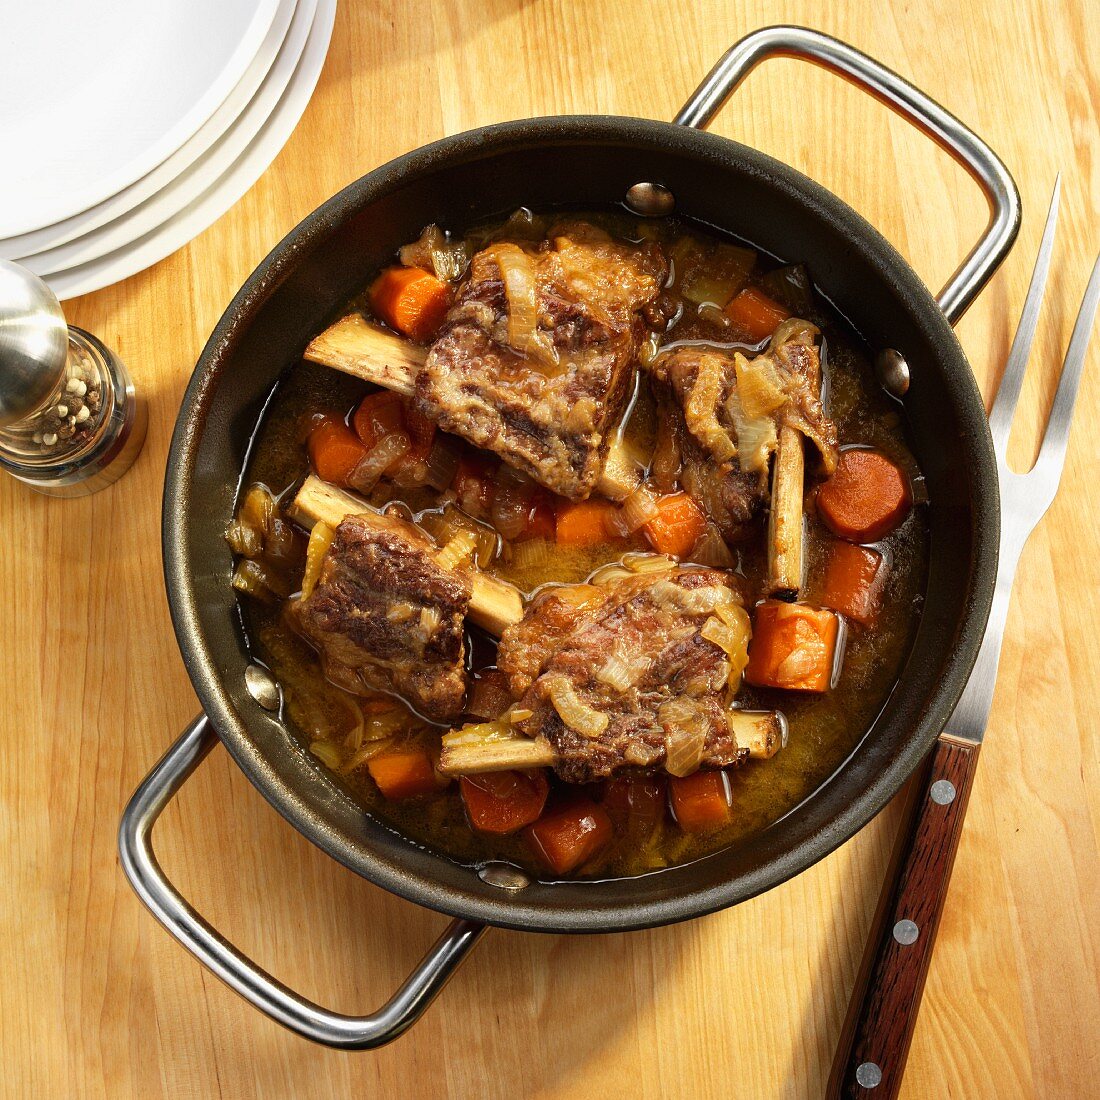 Beef ribs braised in beer with carrots, onions and celery in a pot